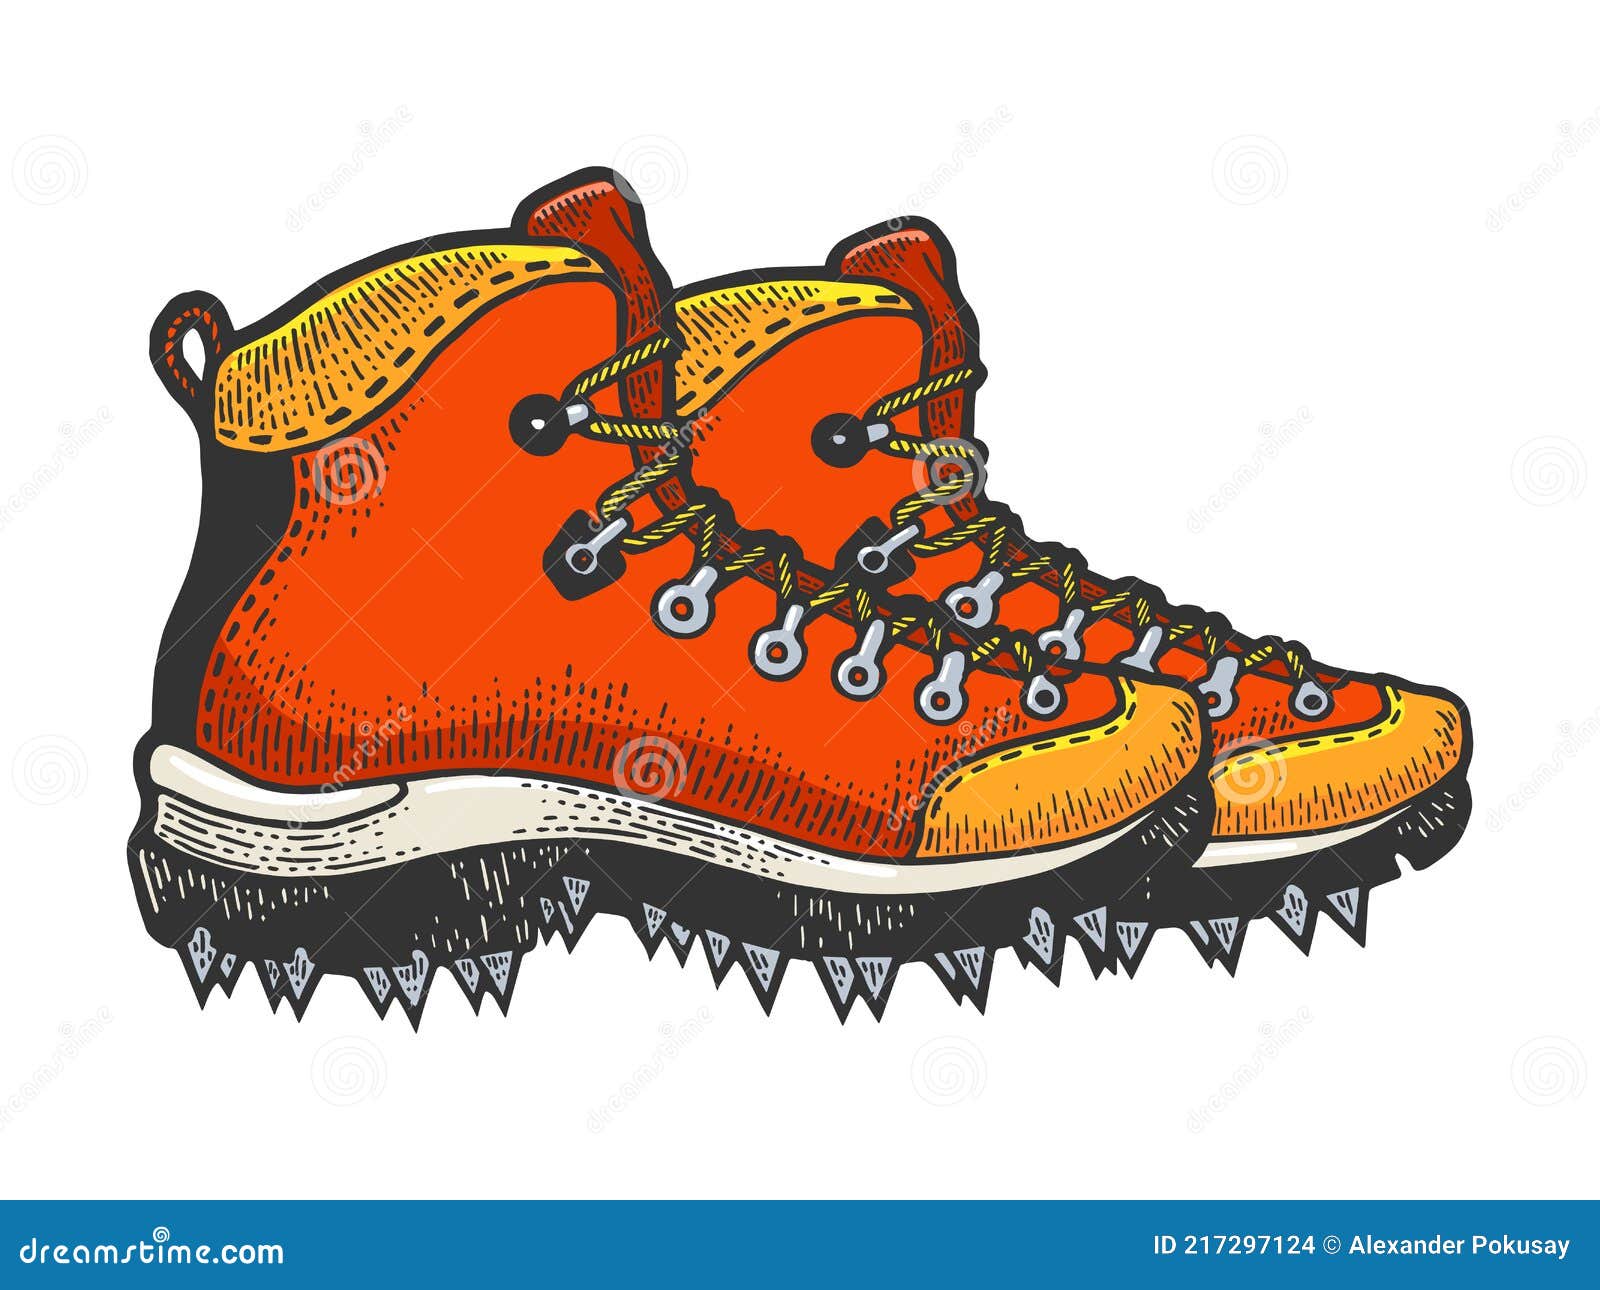 Climber Hiking Boots with Spikes Sketch Vector Stock Vector ...